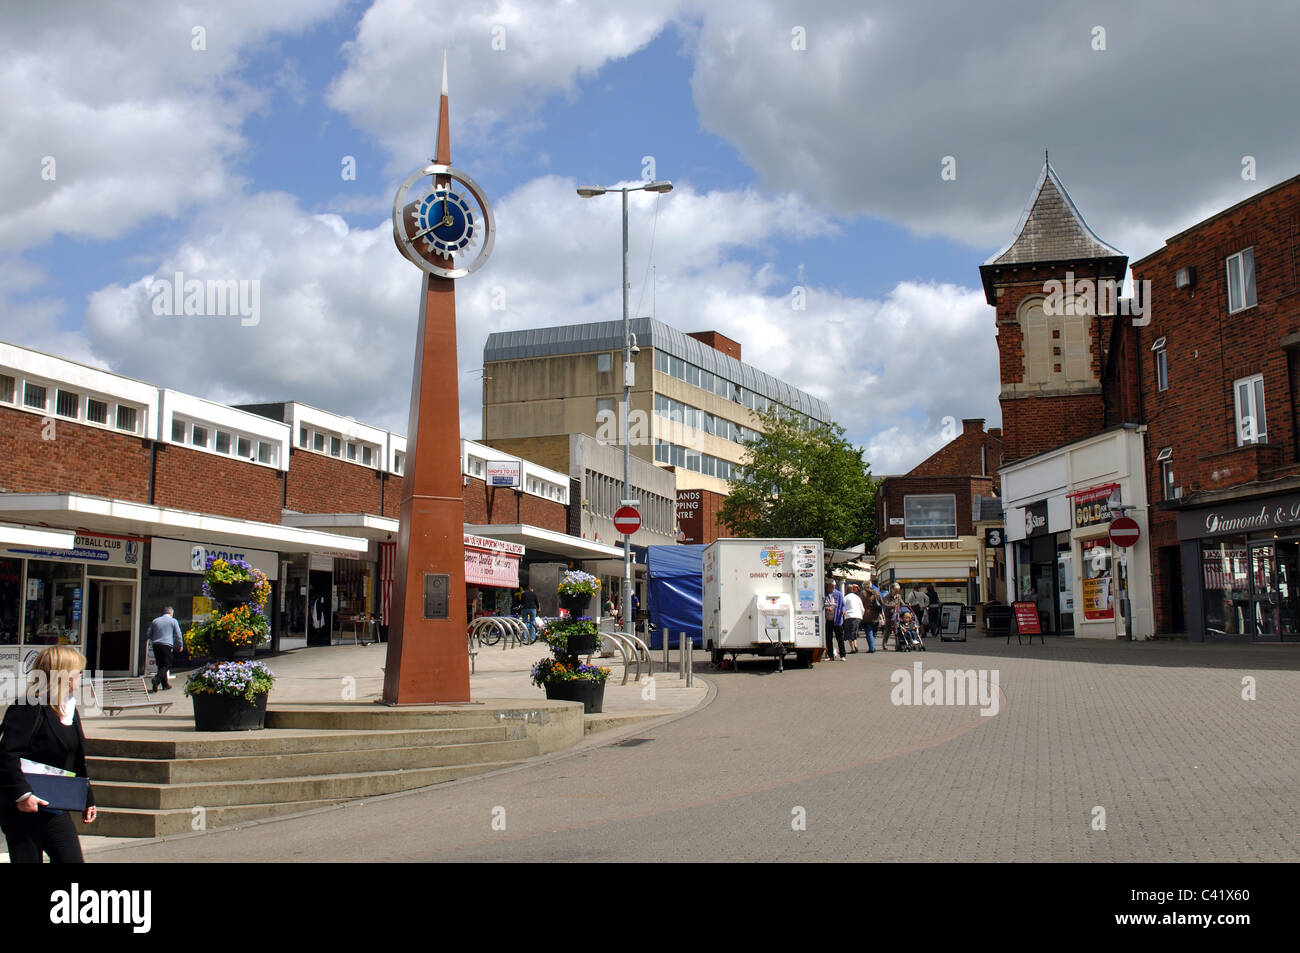 The town centre, Kettering, Northamptonshire, England, UK Stock Photo